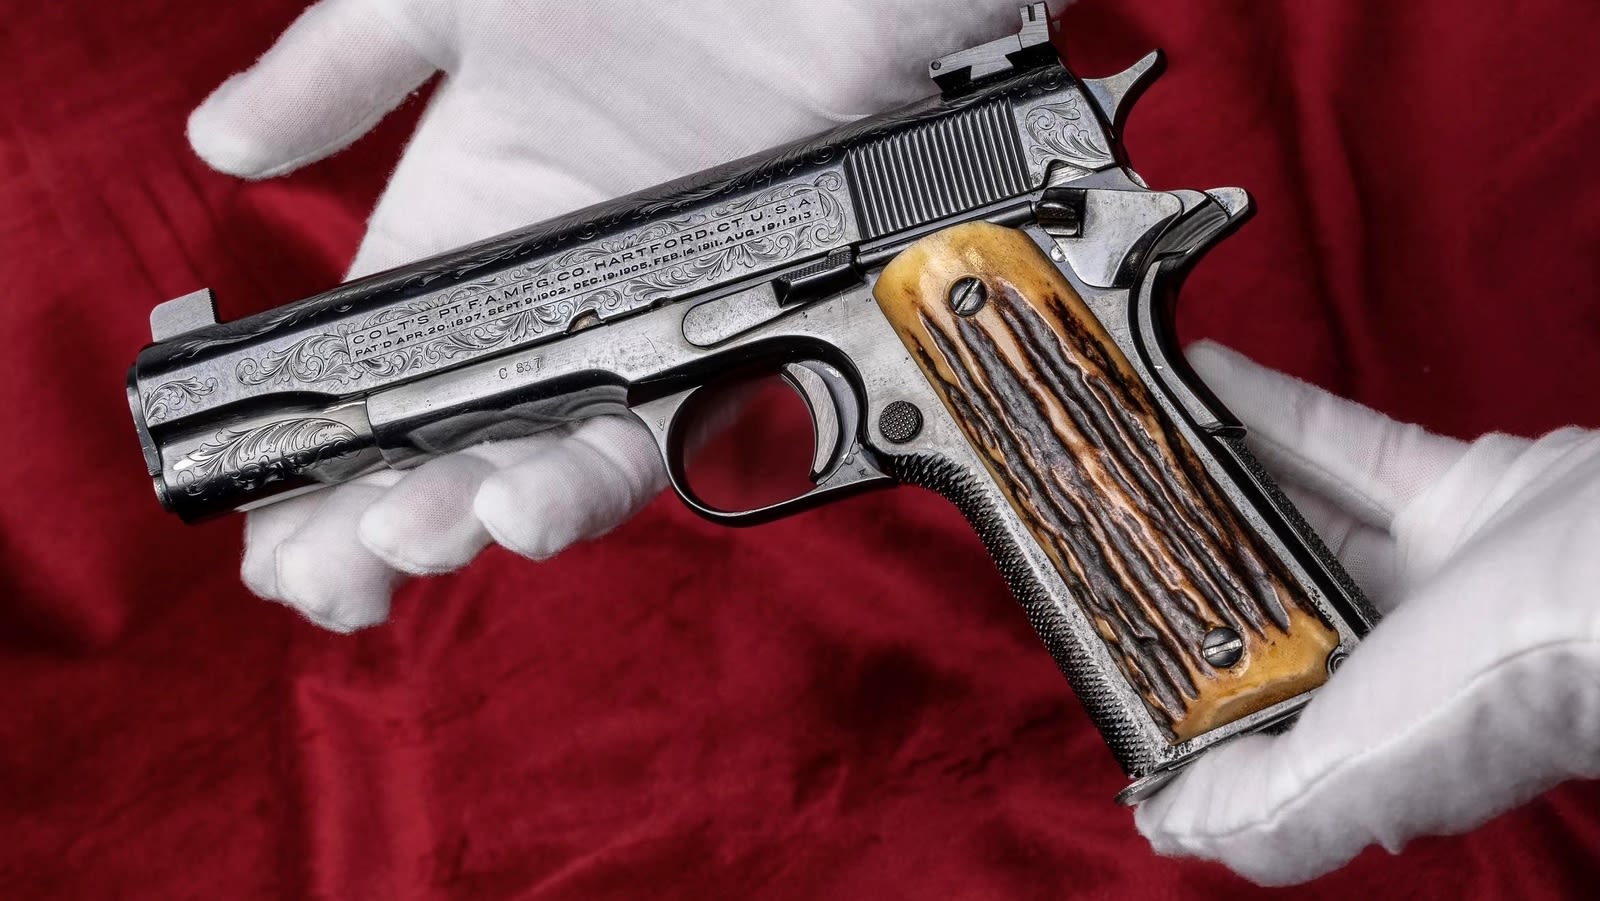 Chicago mobster Al Capone gun auction for sidearm 'Sweetheart' stopped after bids top out at $885K